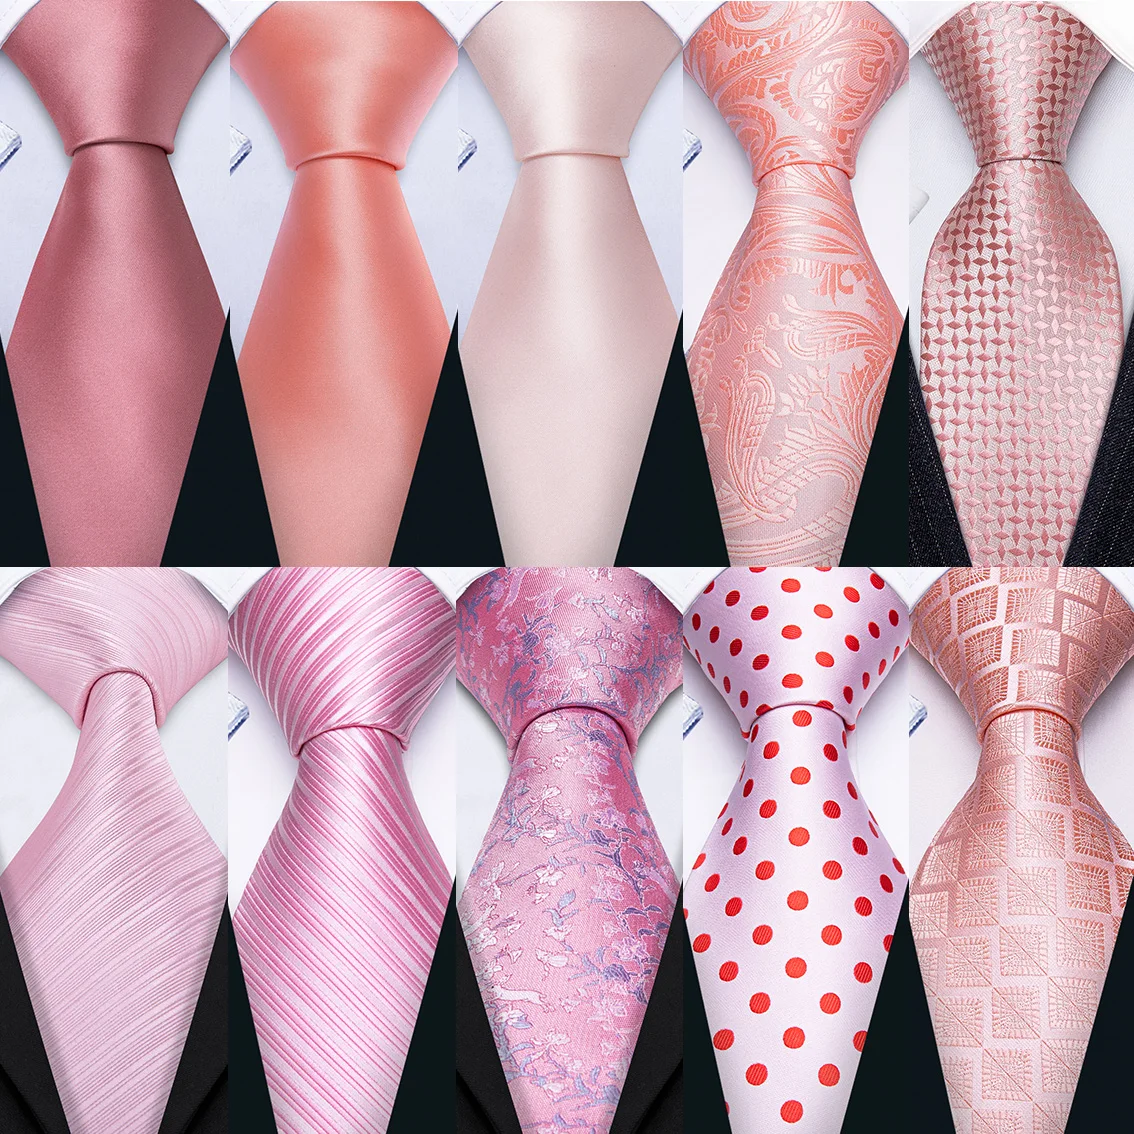 Fashion Silk Pink Mens Wedding Tie Hanky Set Barry.Wang Fashion Designer Paisley Floral Neckties For Men Gift Party Groom Office